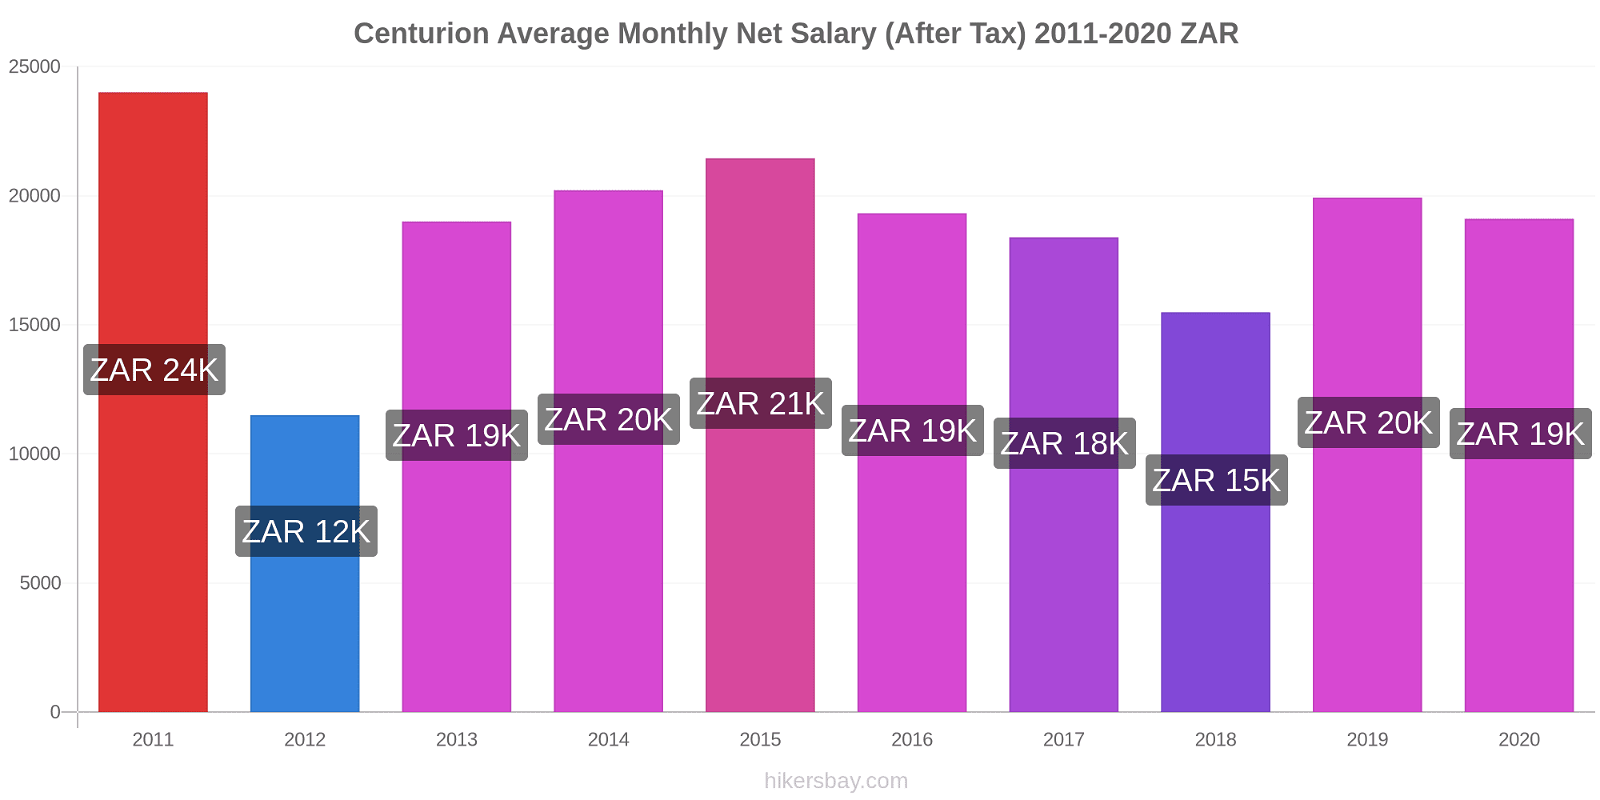 Centurion price changes Average Monthly Net Salary (After Tax) hikersbay.com